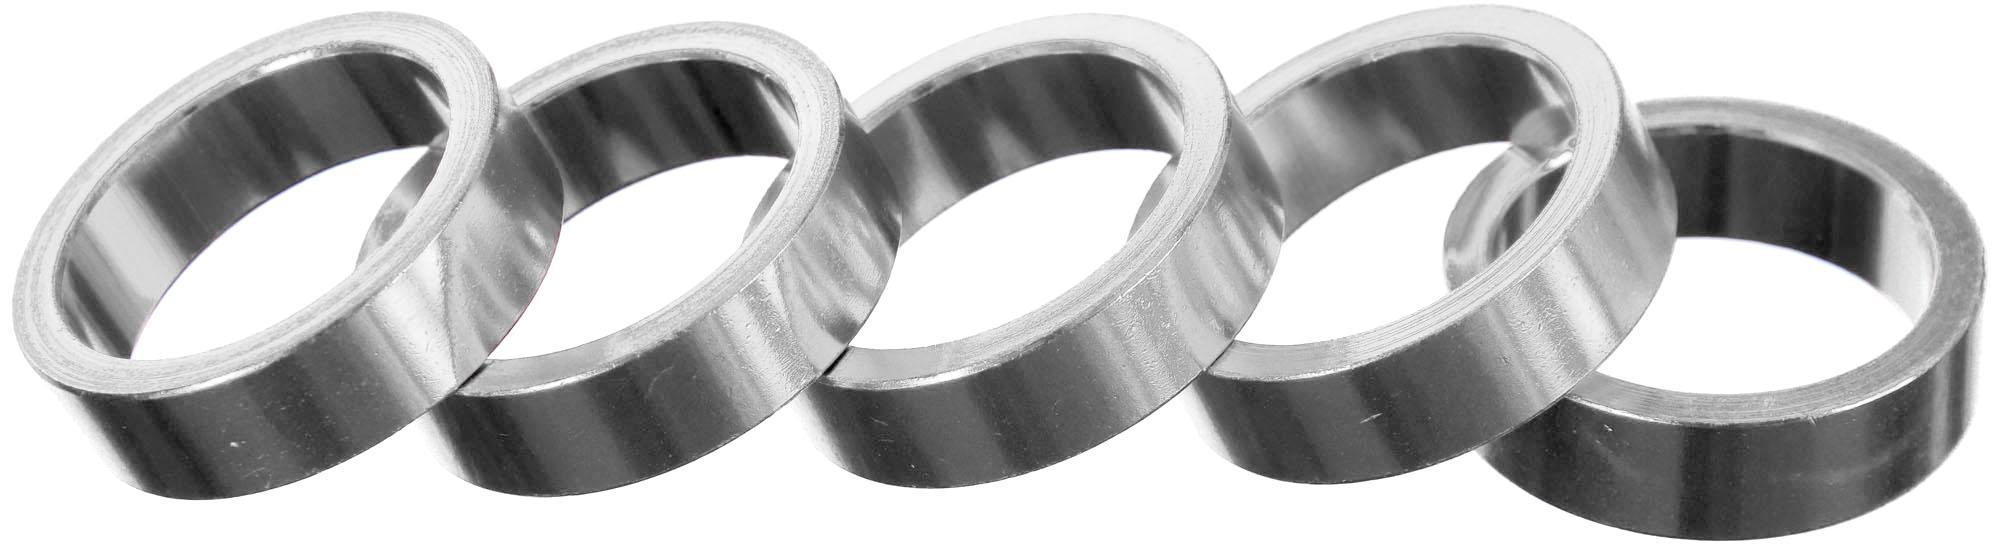 Brand-x Alloy Headset Spacers (5x10mm)  Silver